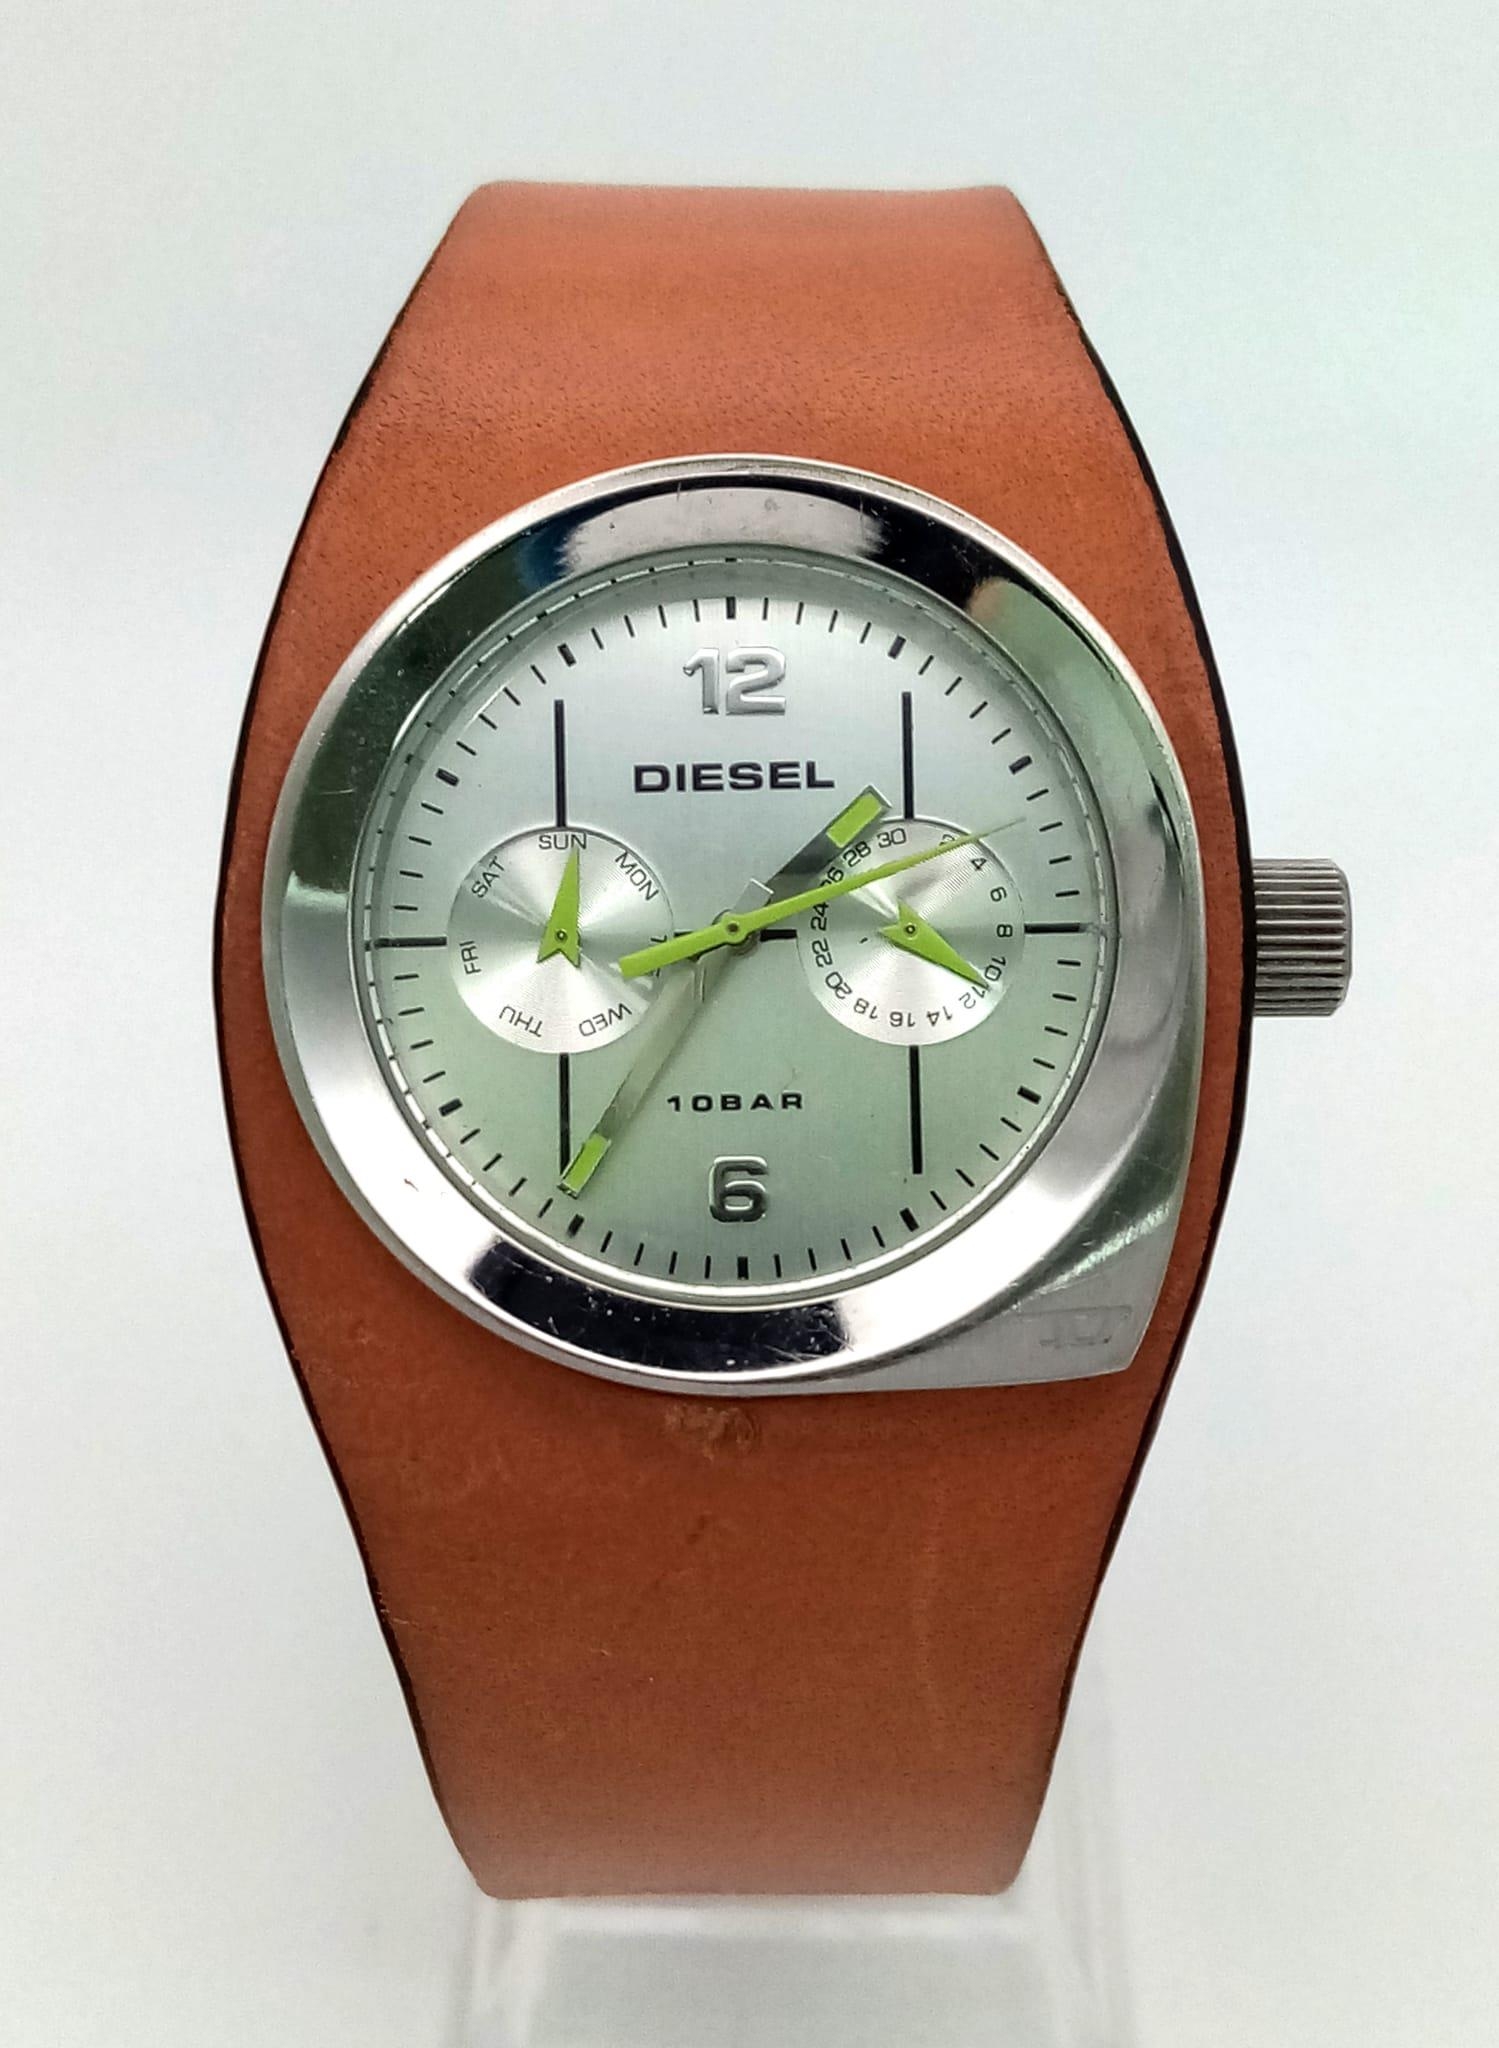 A DIESEL stainless steel watch with its original leather strap. 34 mm case, multi-dial face, water